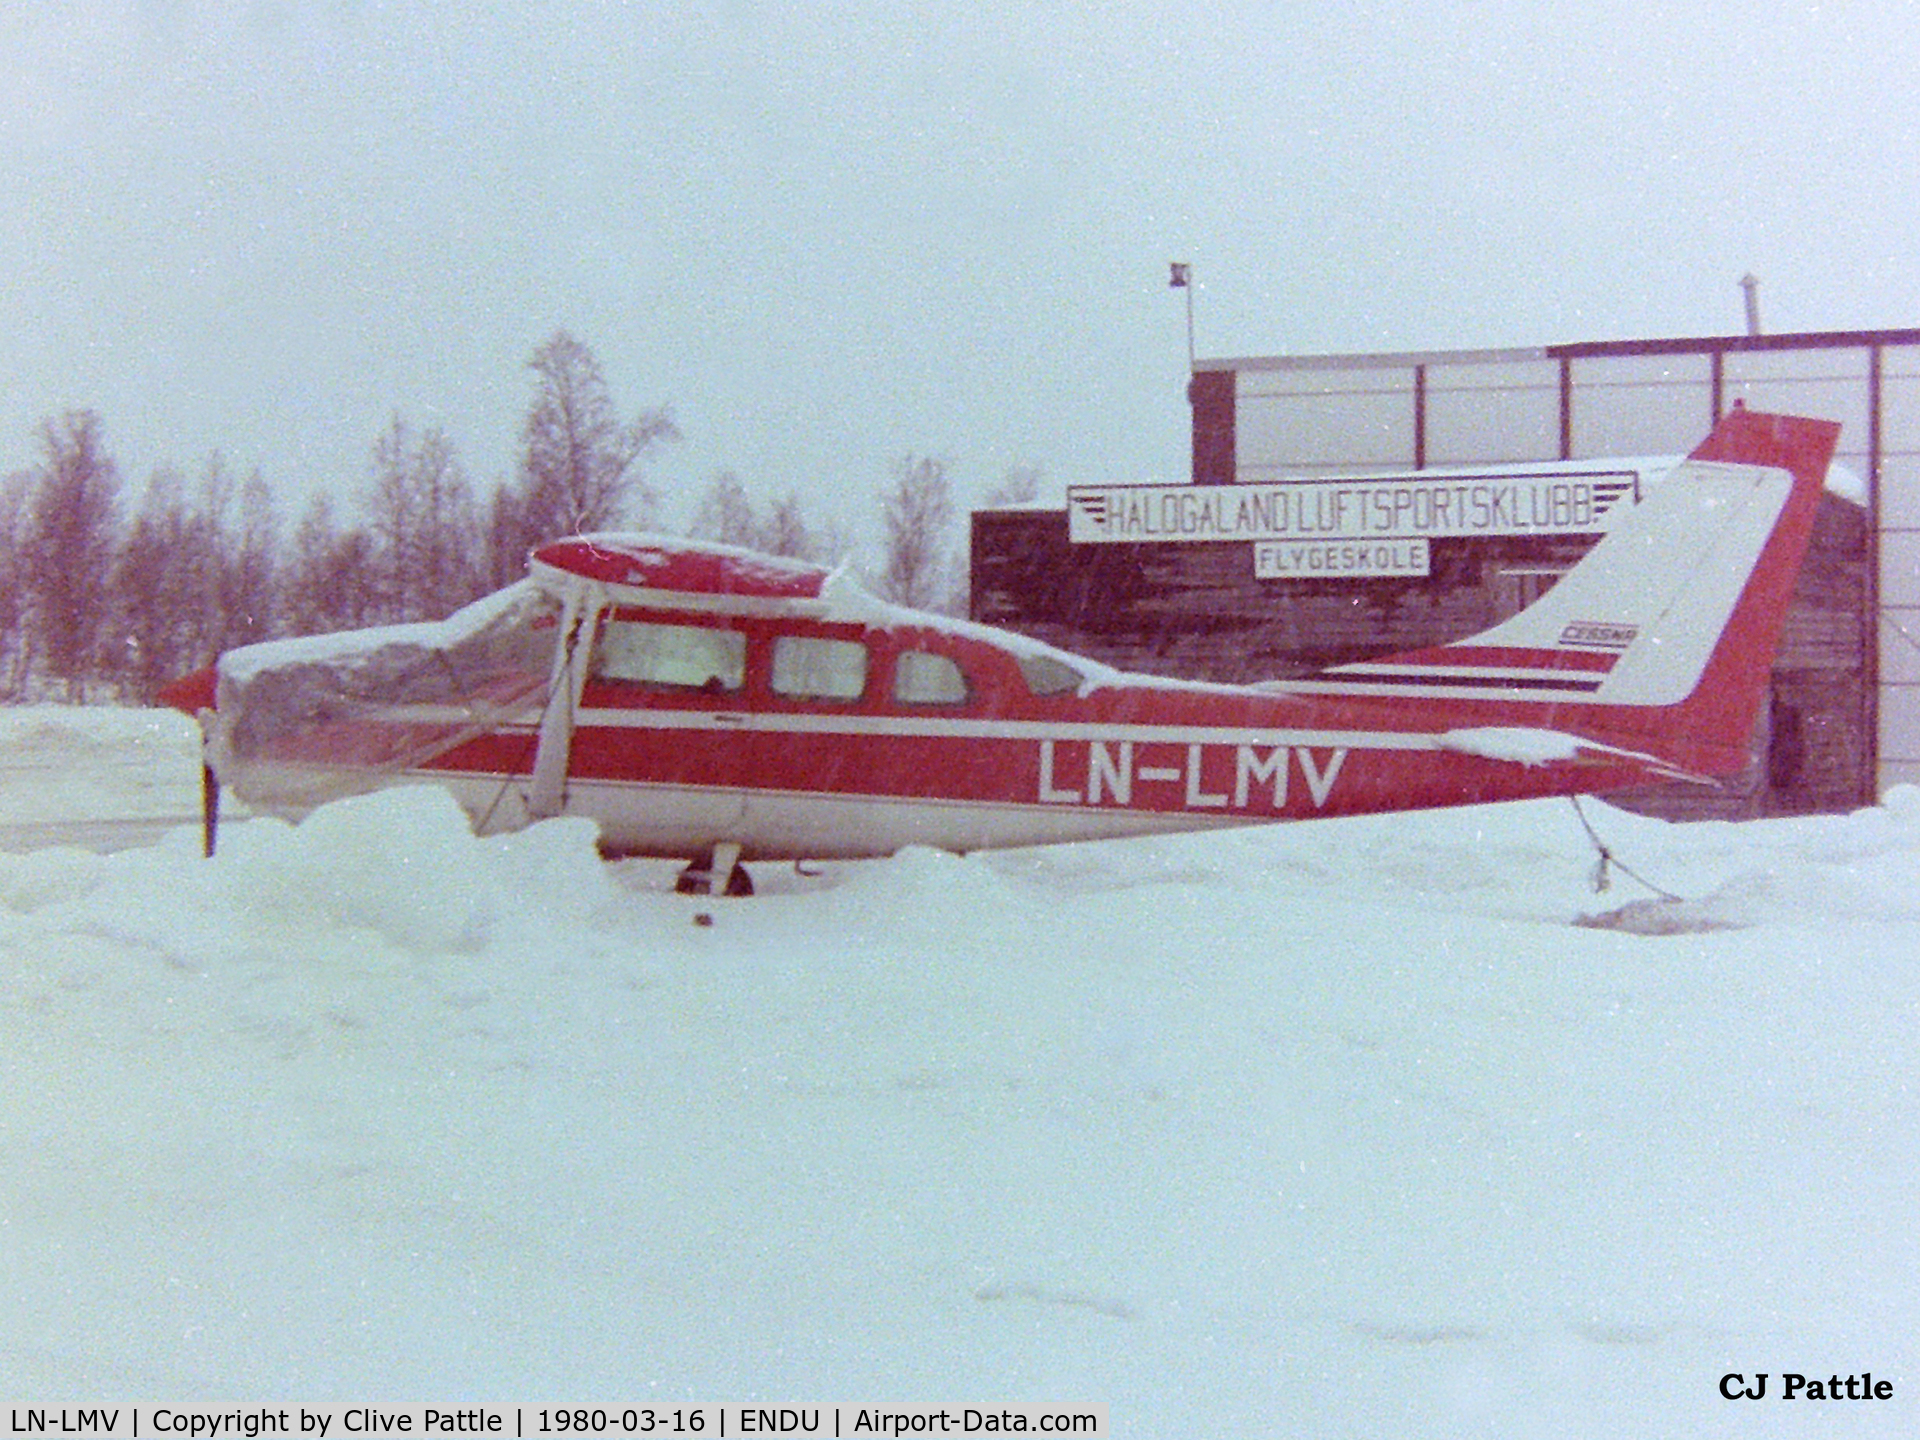 LN-LMV, Cessna U206C Super Skywagon Super Skywagon C/N 206-1118, Scanned from negative. Pictured at a snowy Bardufoss airport, Norway. This aircraft was destroyed in a crash 2004-09-14